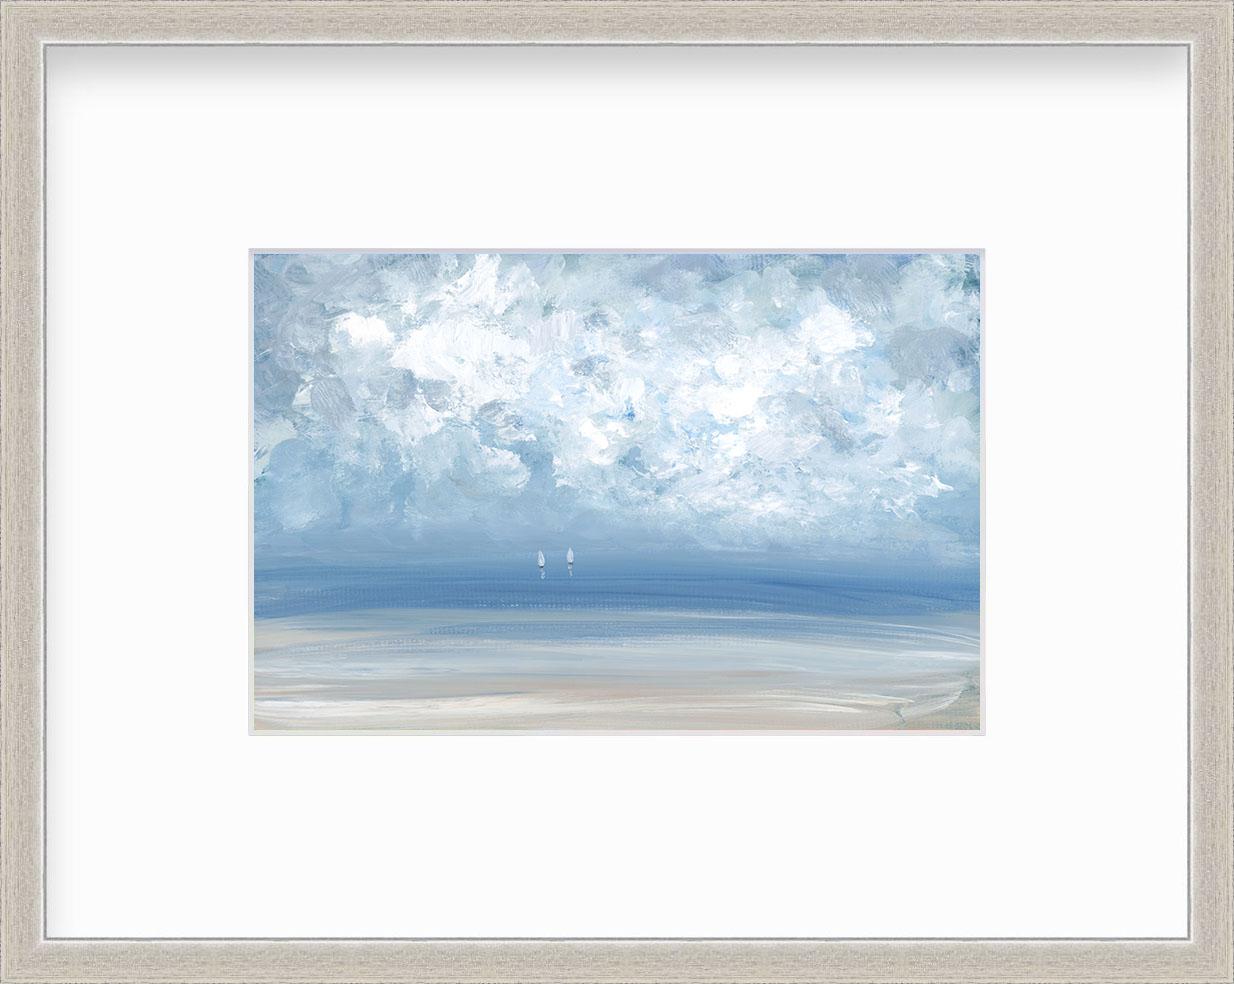 This contemporary seascape limited edition print by S.C. Aldo depicts a lightly abstracted coastal scene with a light blue sky, textured abstract clouds and two small white sailboats sailing near the horizon, casting light reflections into the water